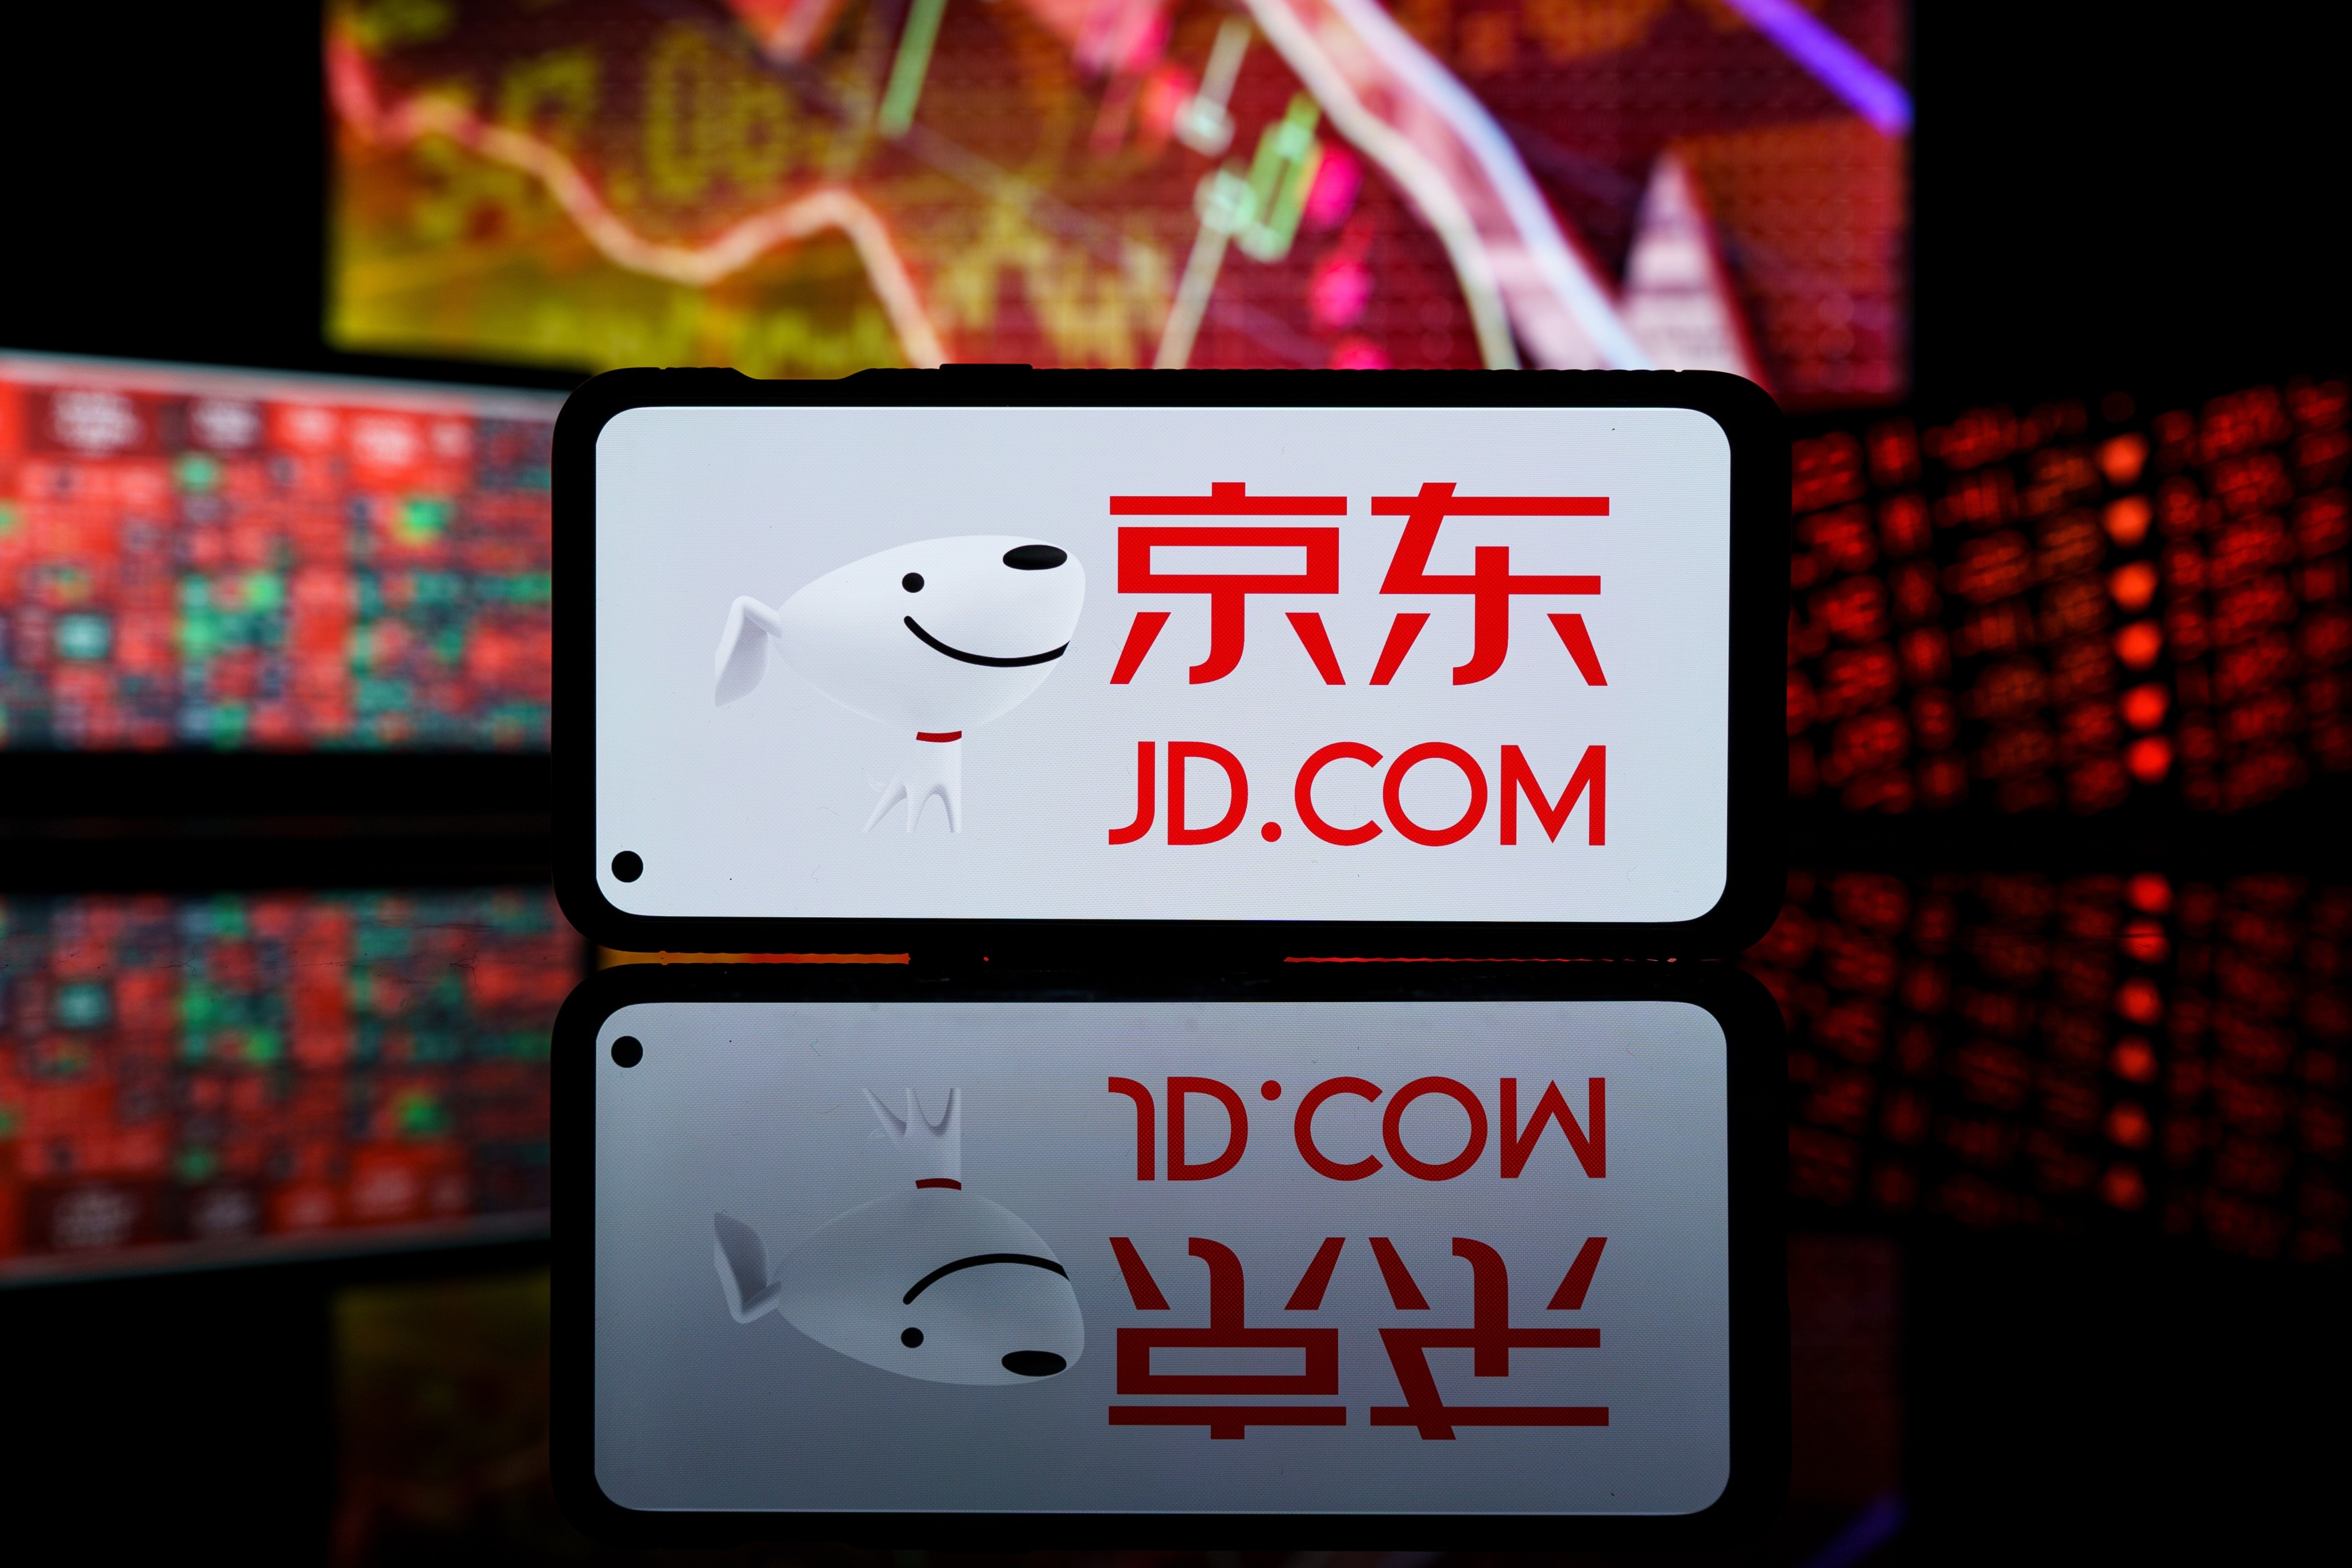 JD.com’s foray into artificial intelligence models reflects the Chinese tech industry’s strong interest to close the gap with the West in building ChatGPT-like services. Photo: Shutterstock